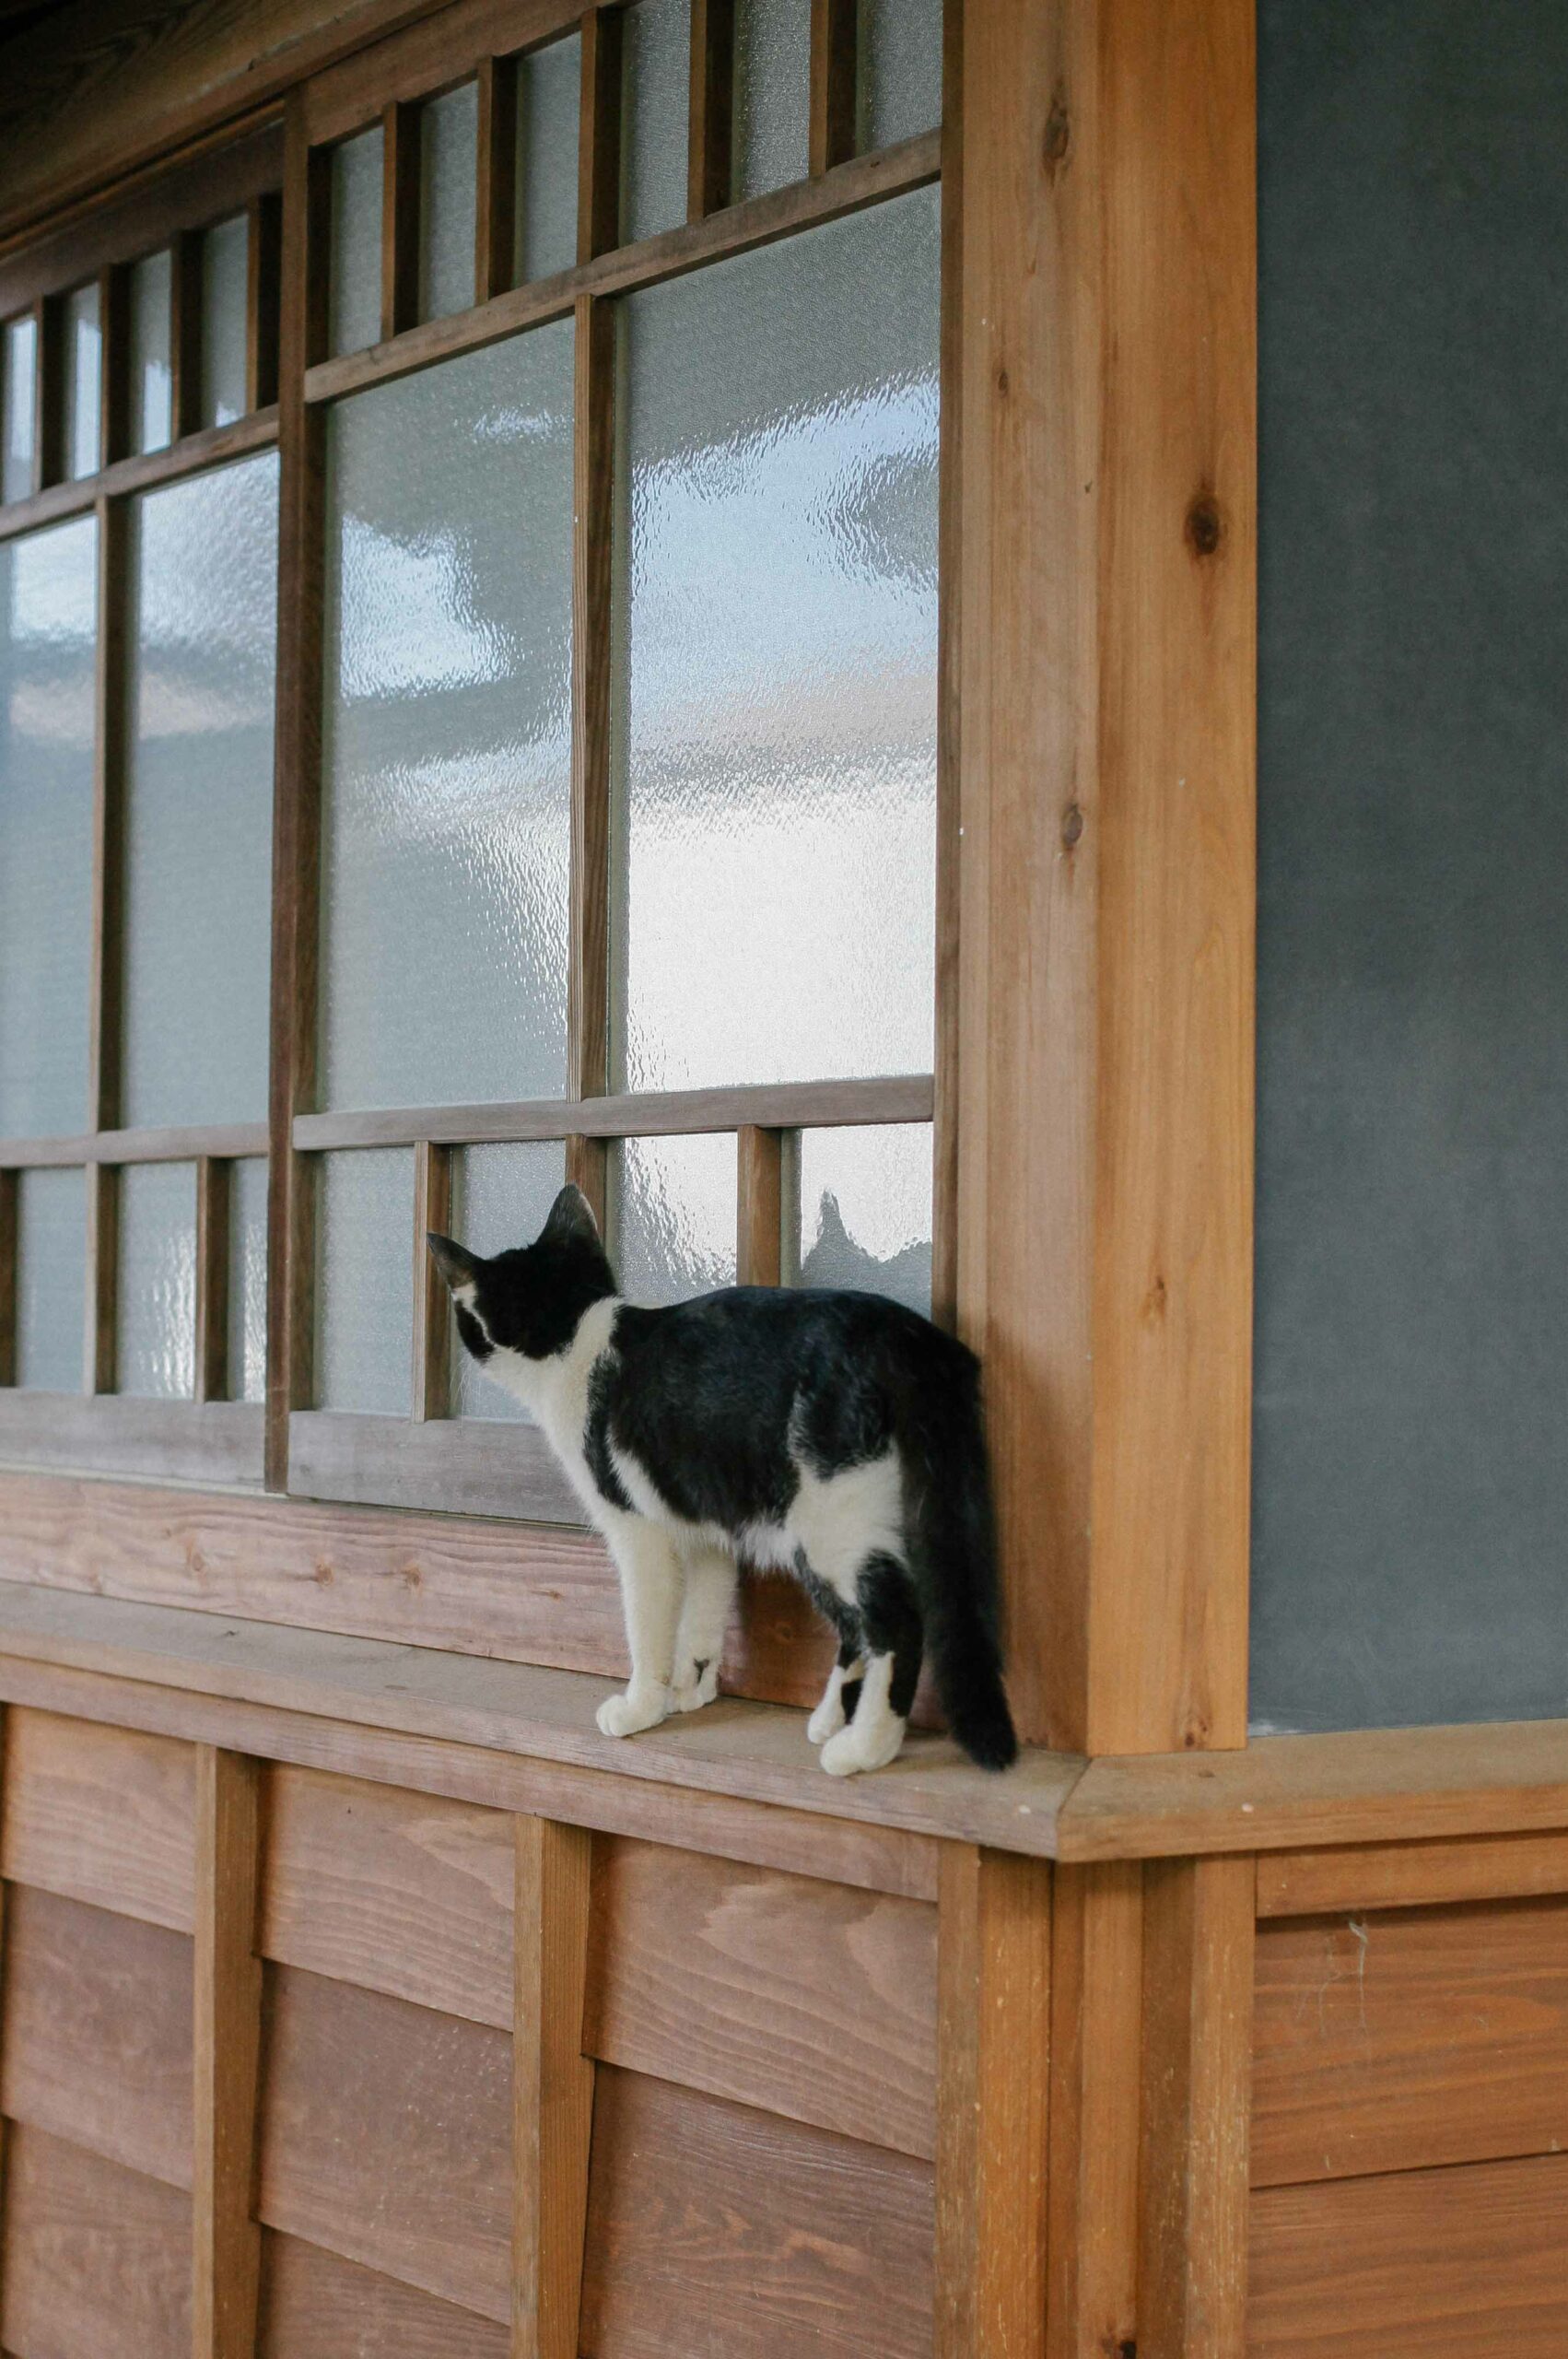 Perhaps the highlight of any visit, Sо̄seki Natsume's house wouldn't be complete without some cats.